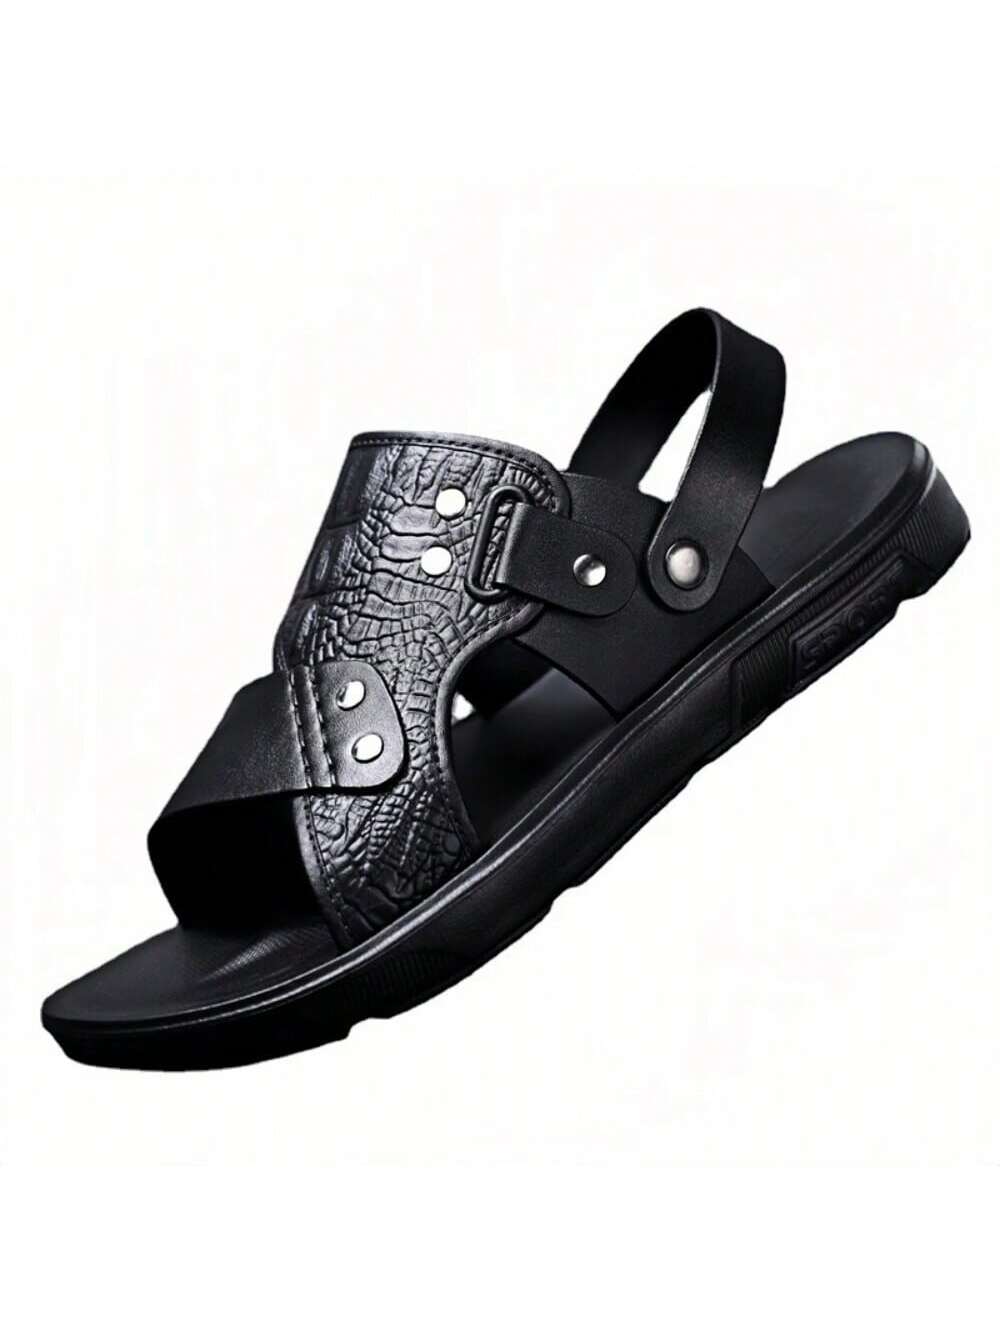 Men's Dual-Purpose Wear-Resistant, Breathable, Anti-Skid, Waterproof, Lightweight & Fashionable Slip-On Sandals Casual Shoes